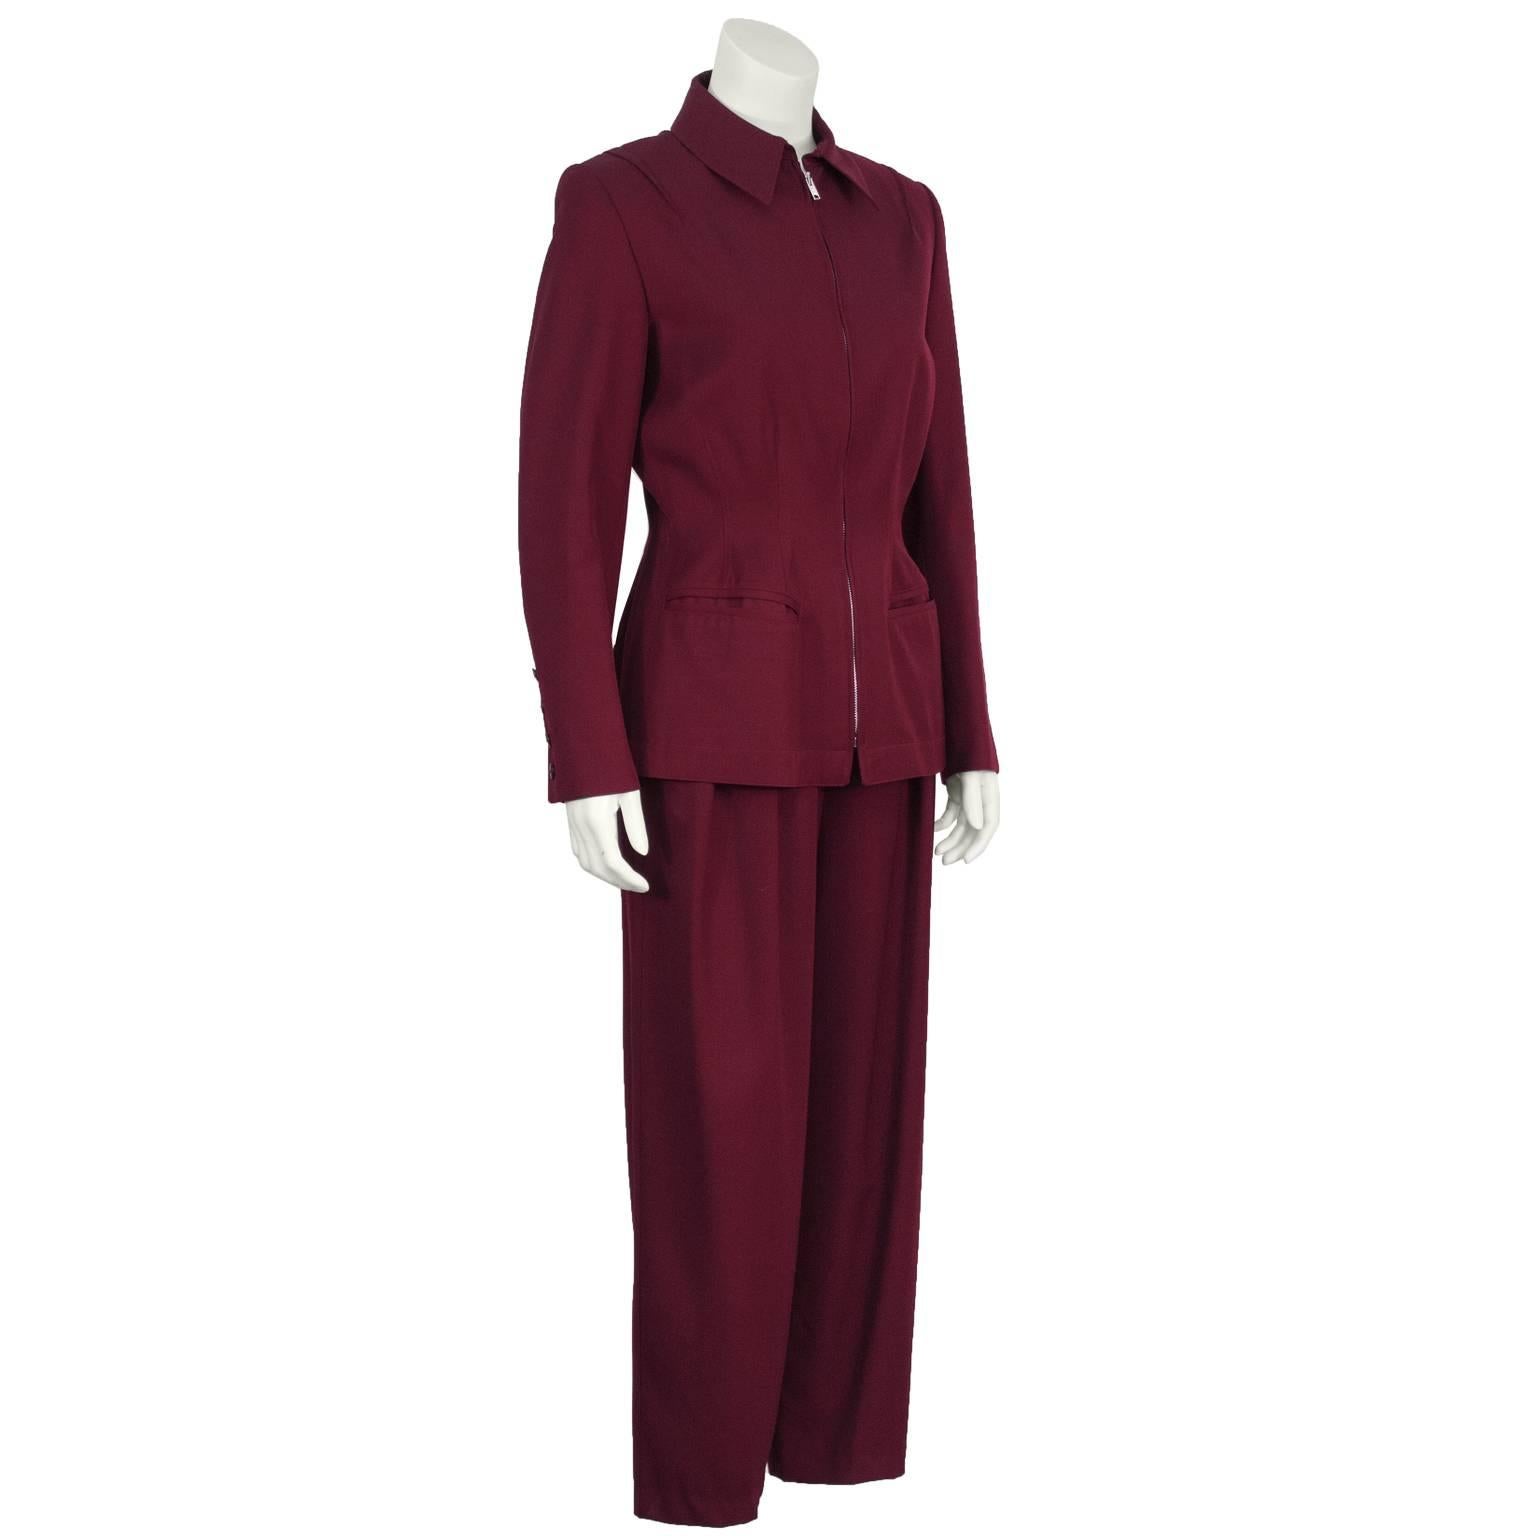 Claude Montana eggplant gabardine jacket and pant set from the 1980s. The collared jacket has a nipped in waist, two sleek slit entry pockets at the hips, and industrial zipper up the front. Shoulders are padded and sleeves are finished with four